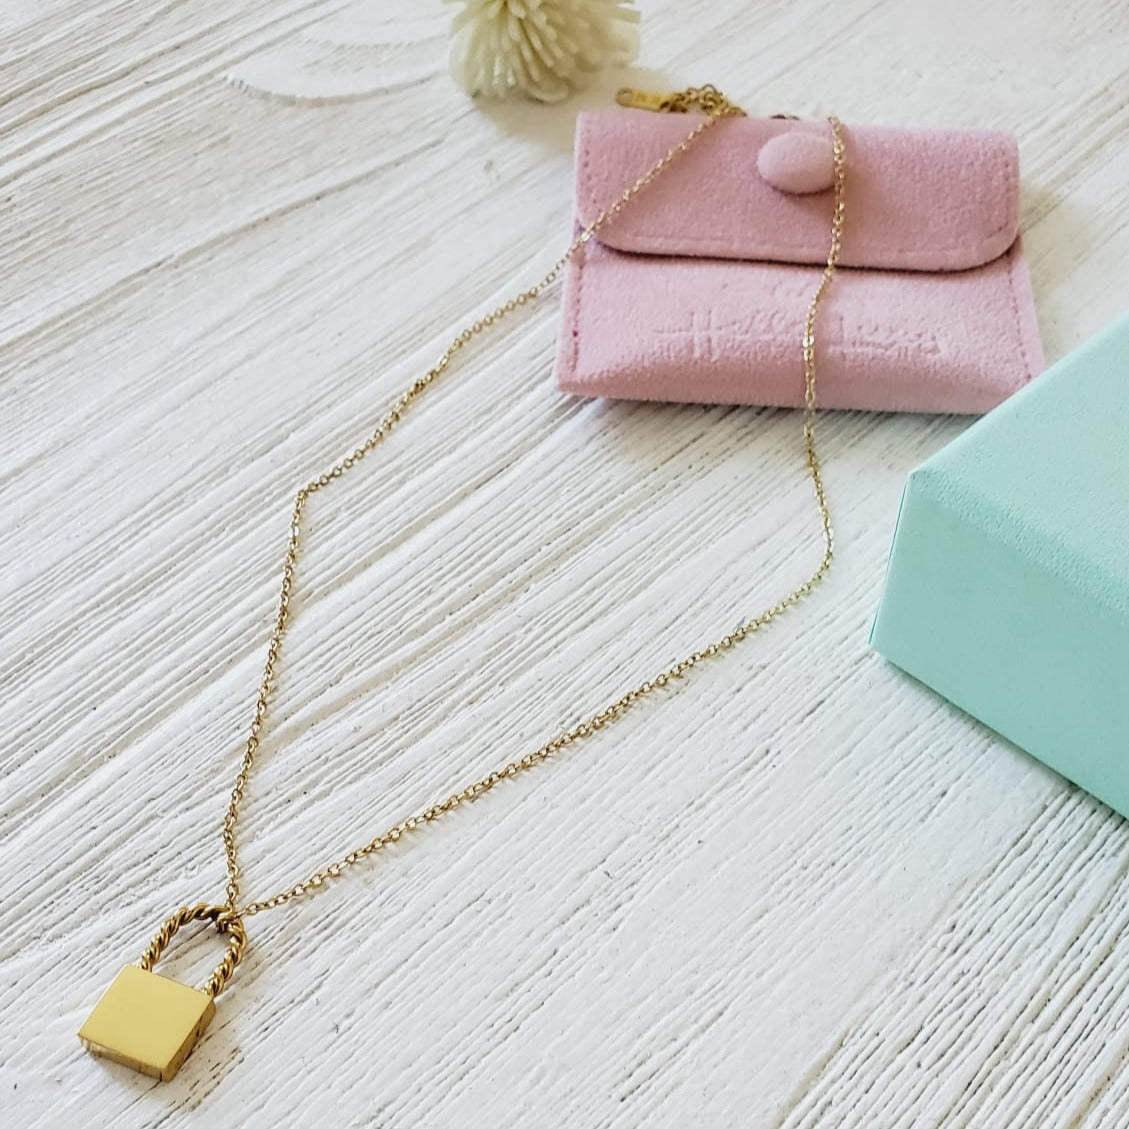 heart necklace, love necklace, valentines necklace, valentines gift, Tiger Necklace, Leo Necklace, 18k Gold Necklace, Gift for her, Gift for mom, Bold jewelry, bold necklace, paperclip necklace, dainty jewelry, vintage jewelry, gold jewelry, goldfilled jewelry, water resistant jewelry, water resistant necklace